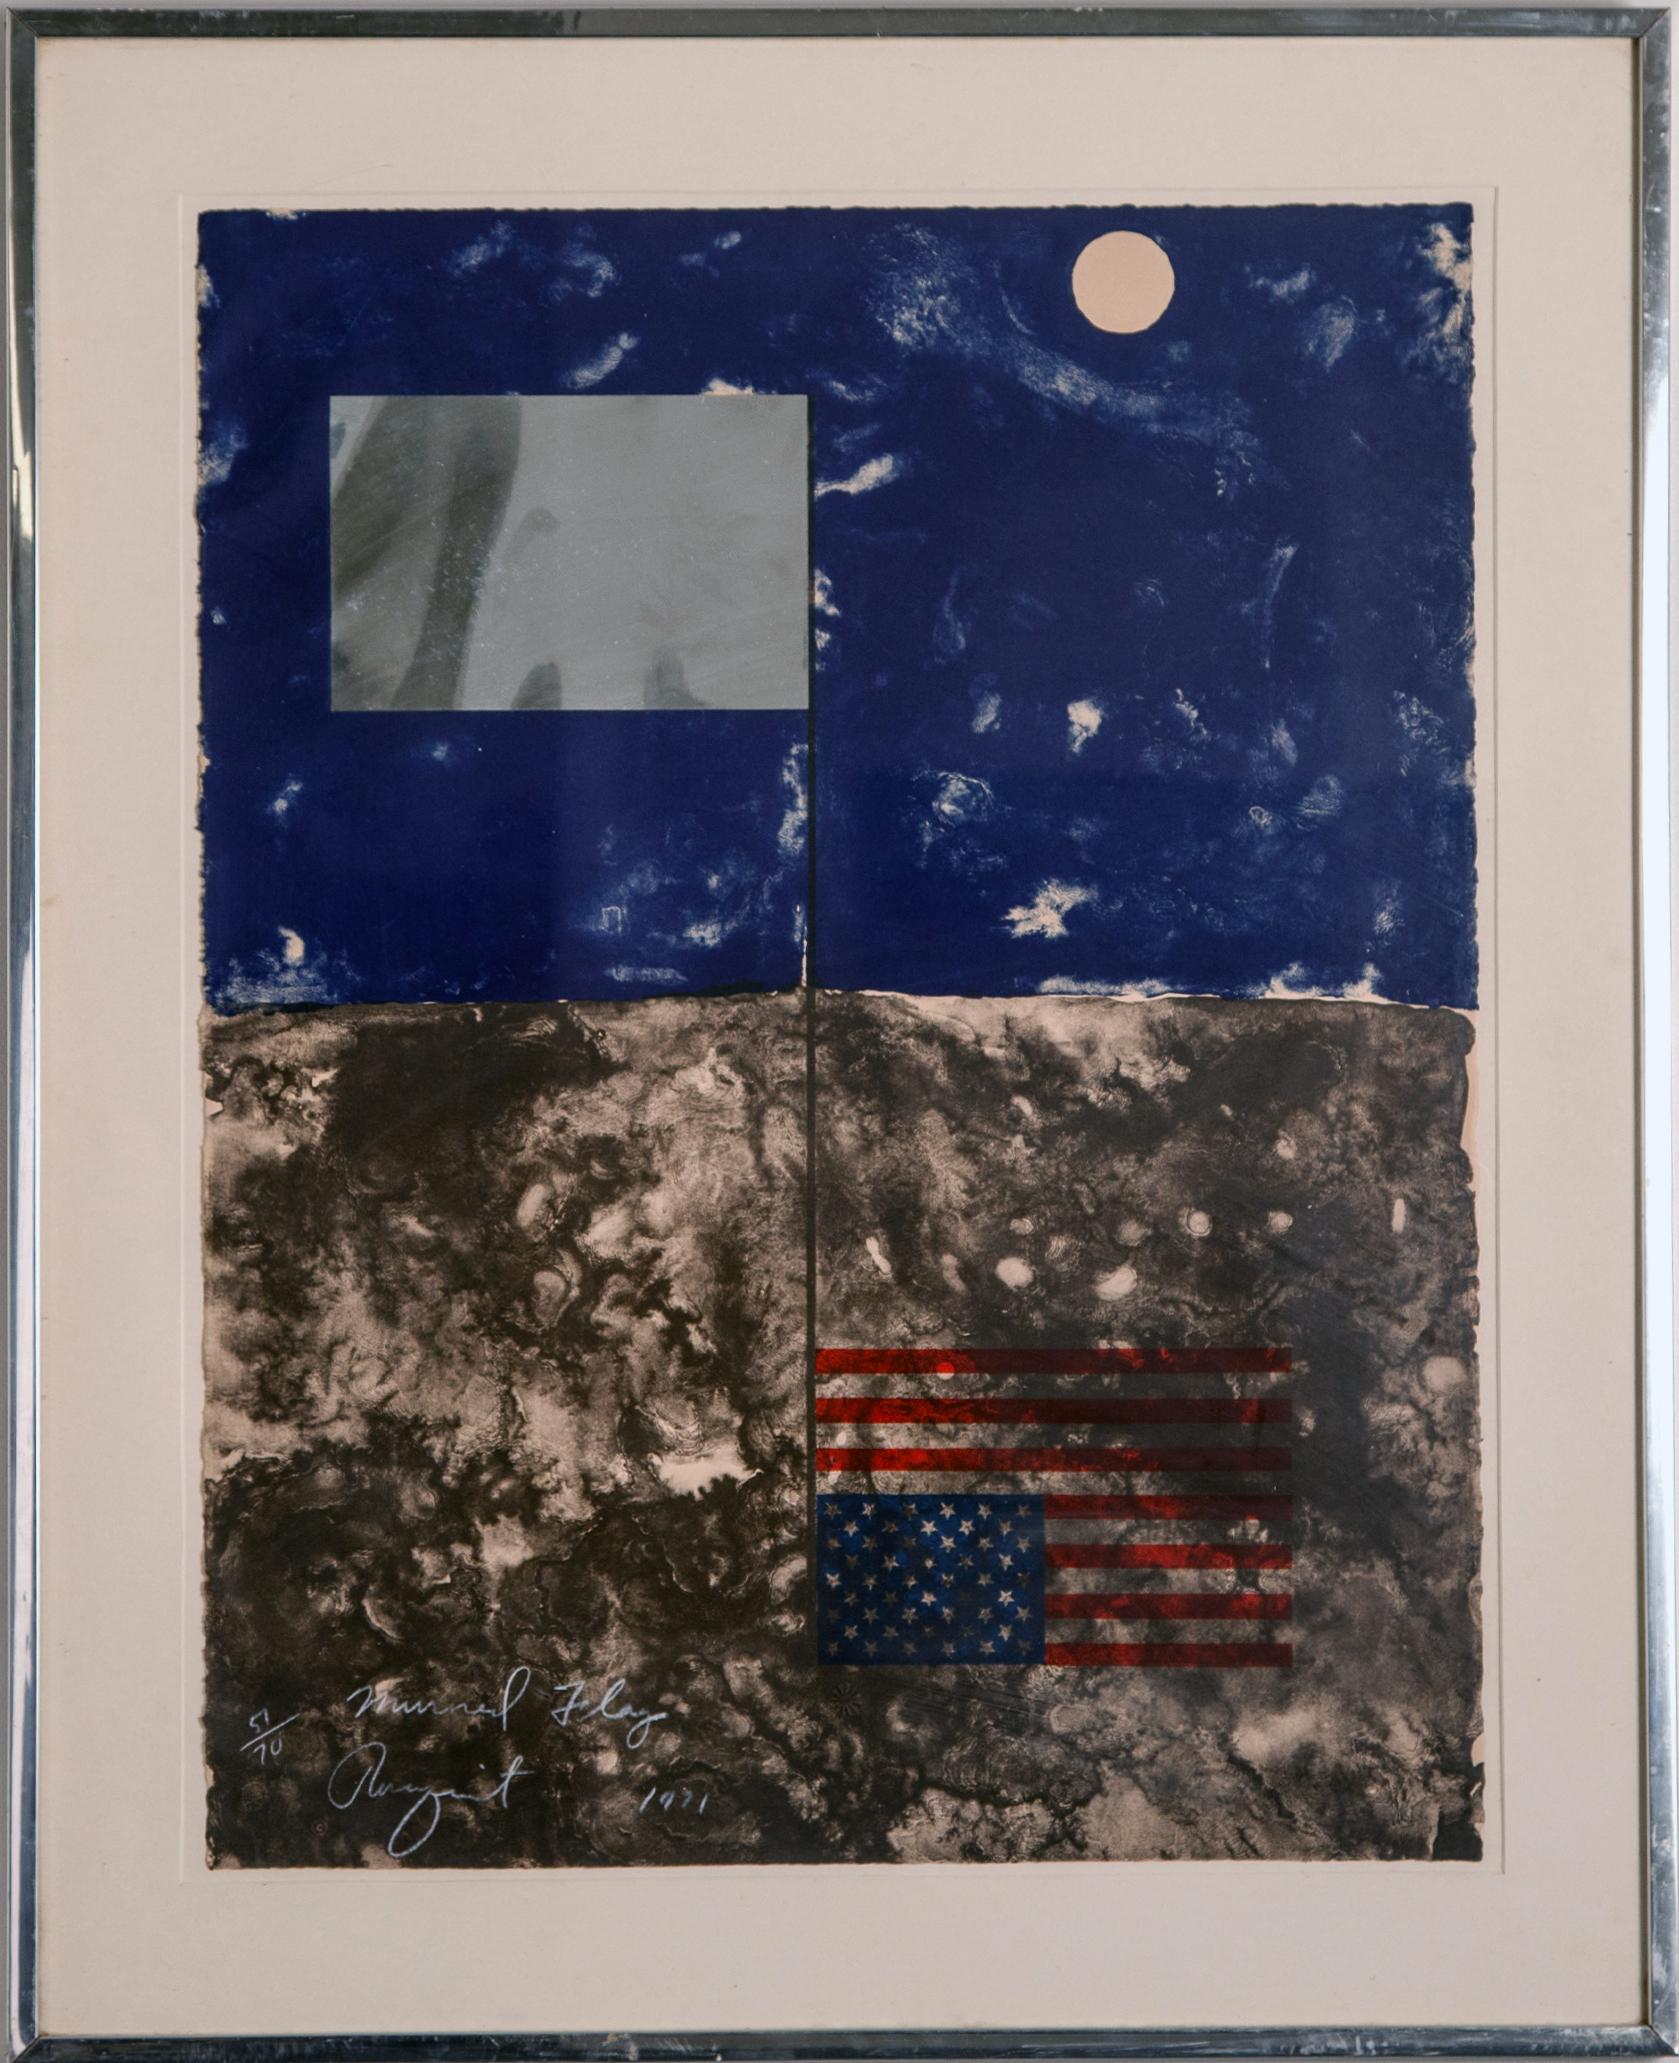 Mirrored Flag from Cold Light Series - Print by James Rosenquist